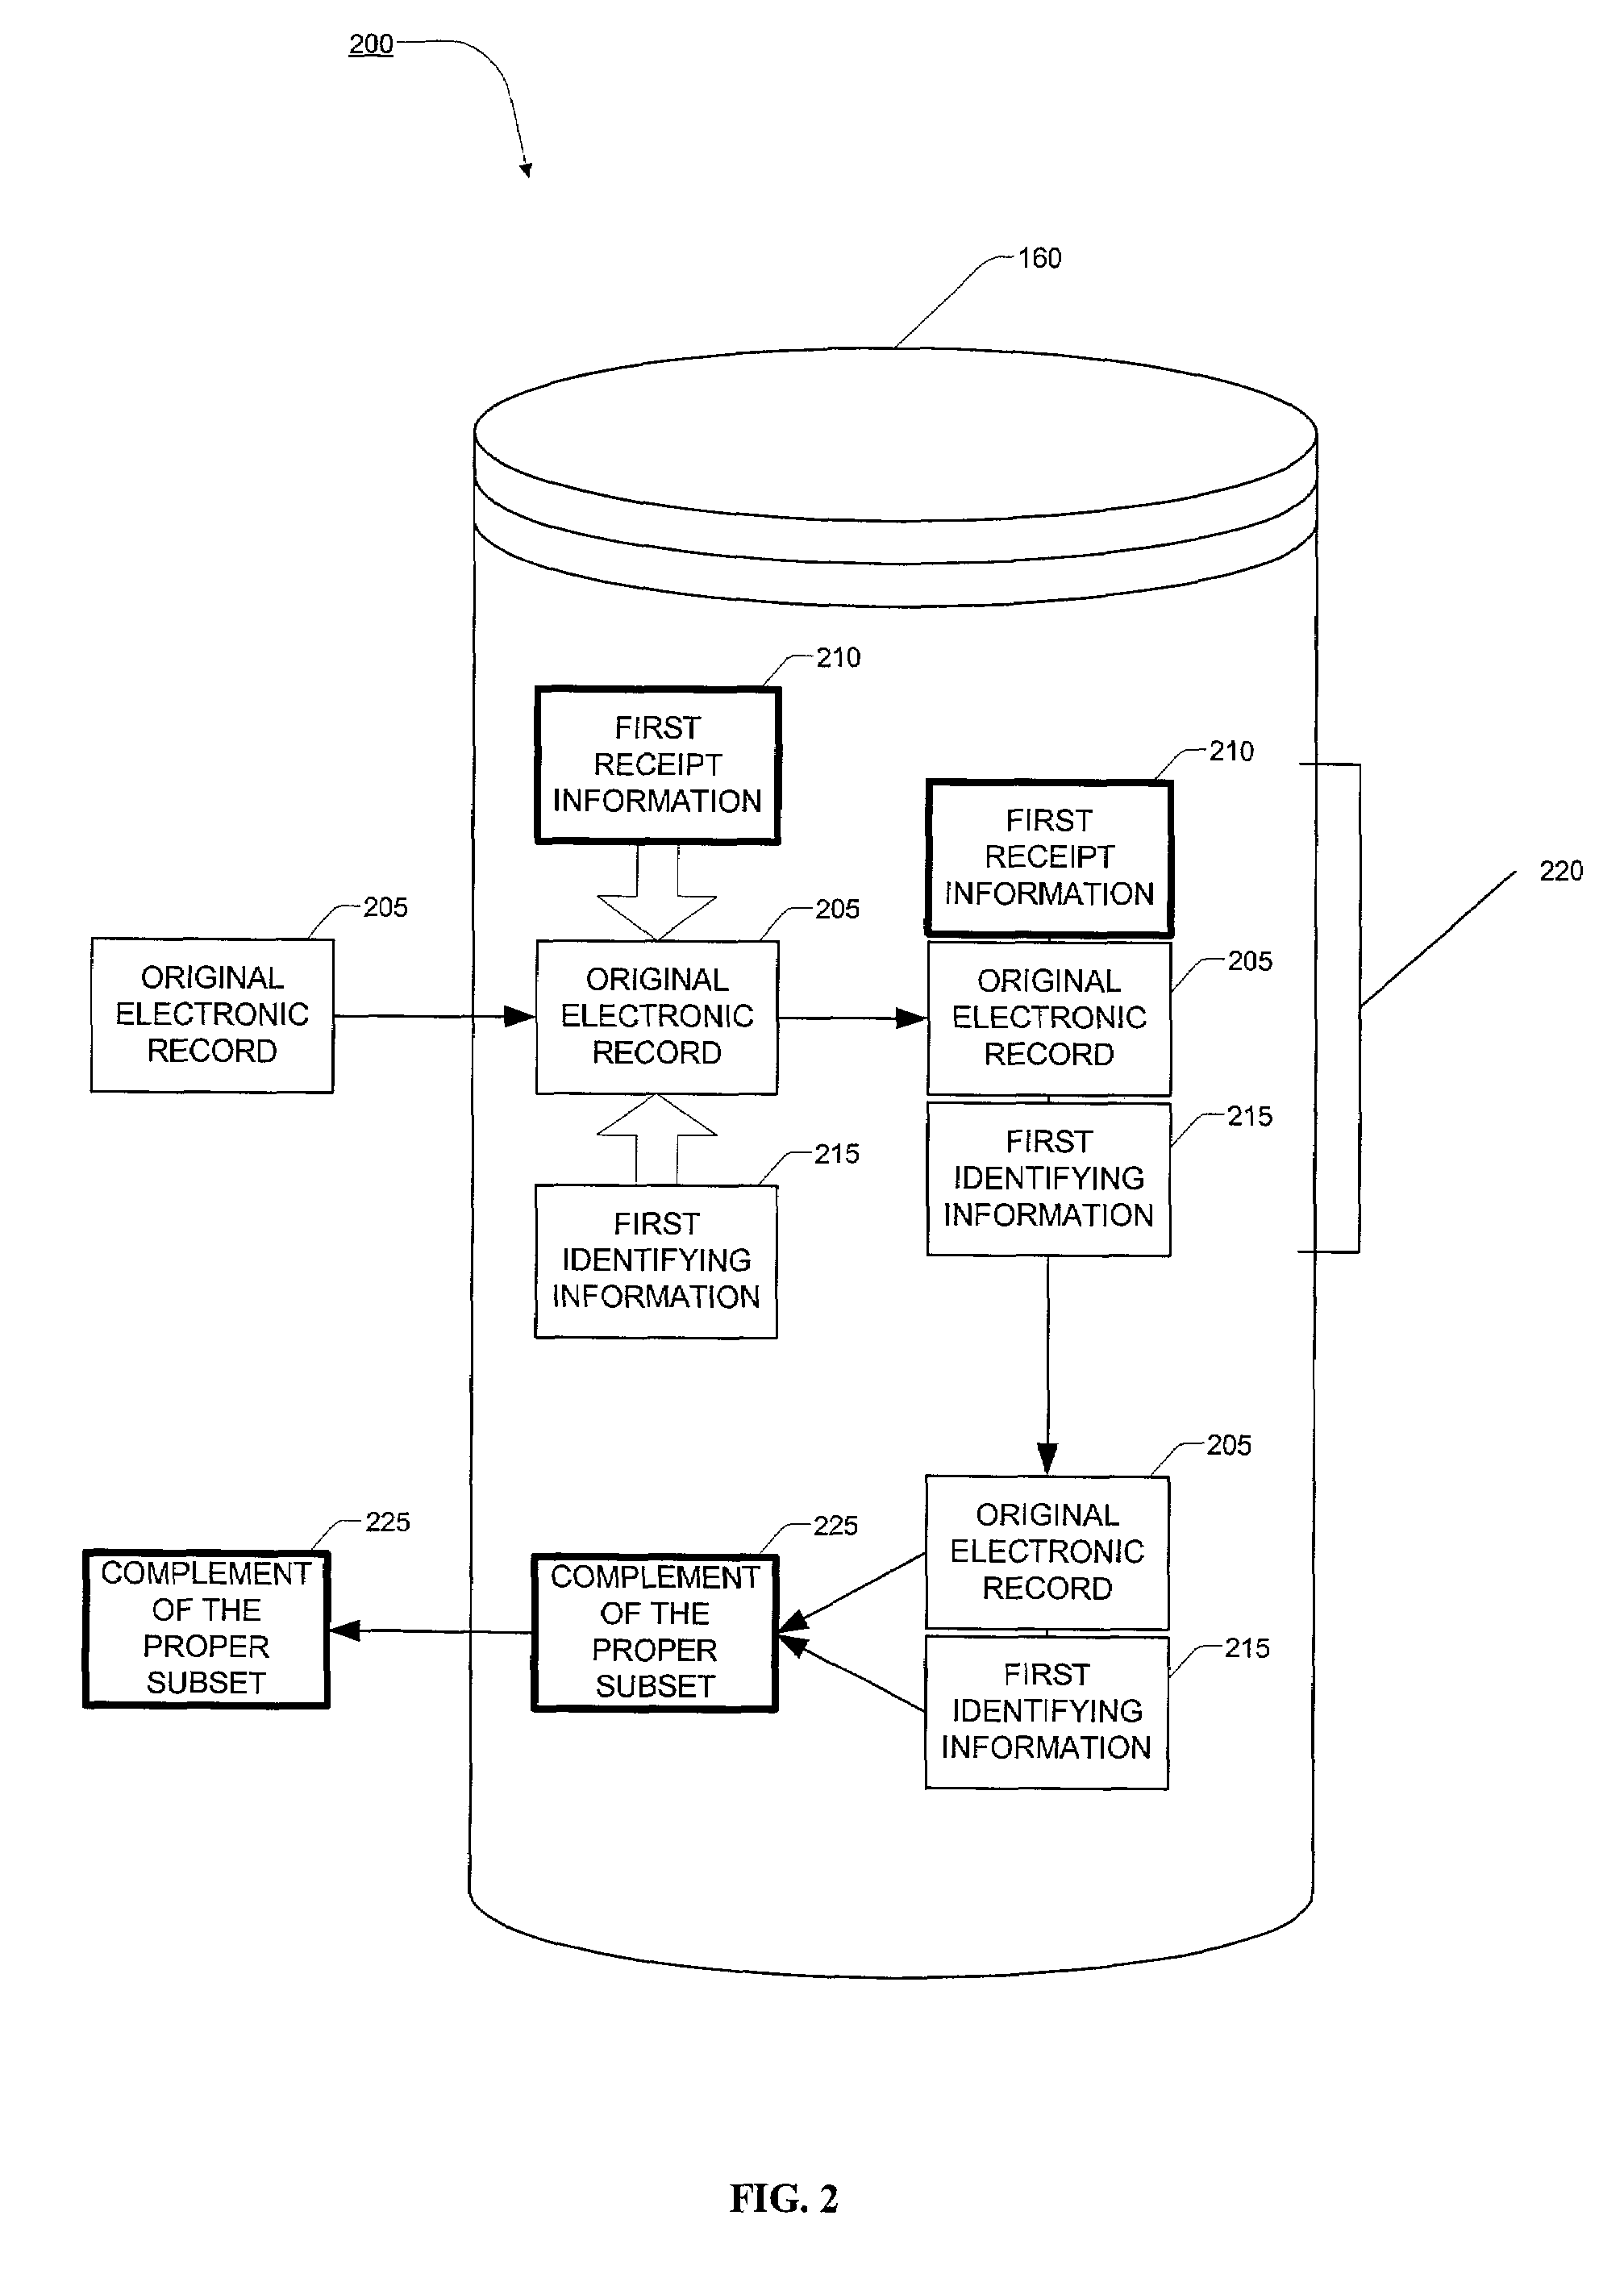 Systems and methods for obtaining digital signatures on a single authoritative copy of an original electronic record